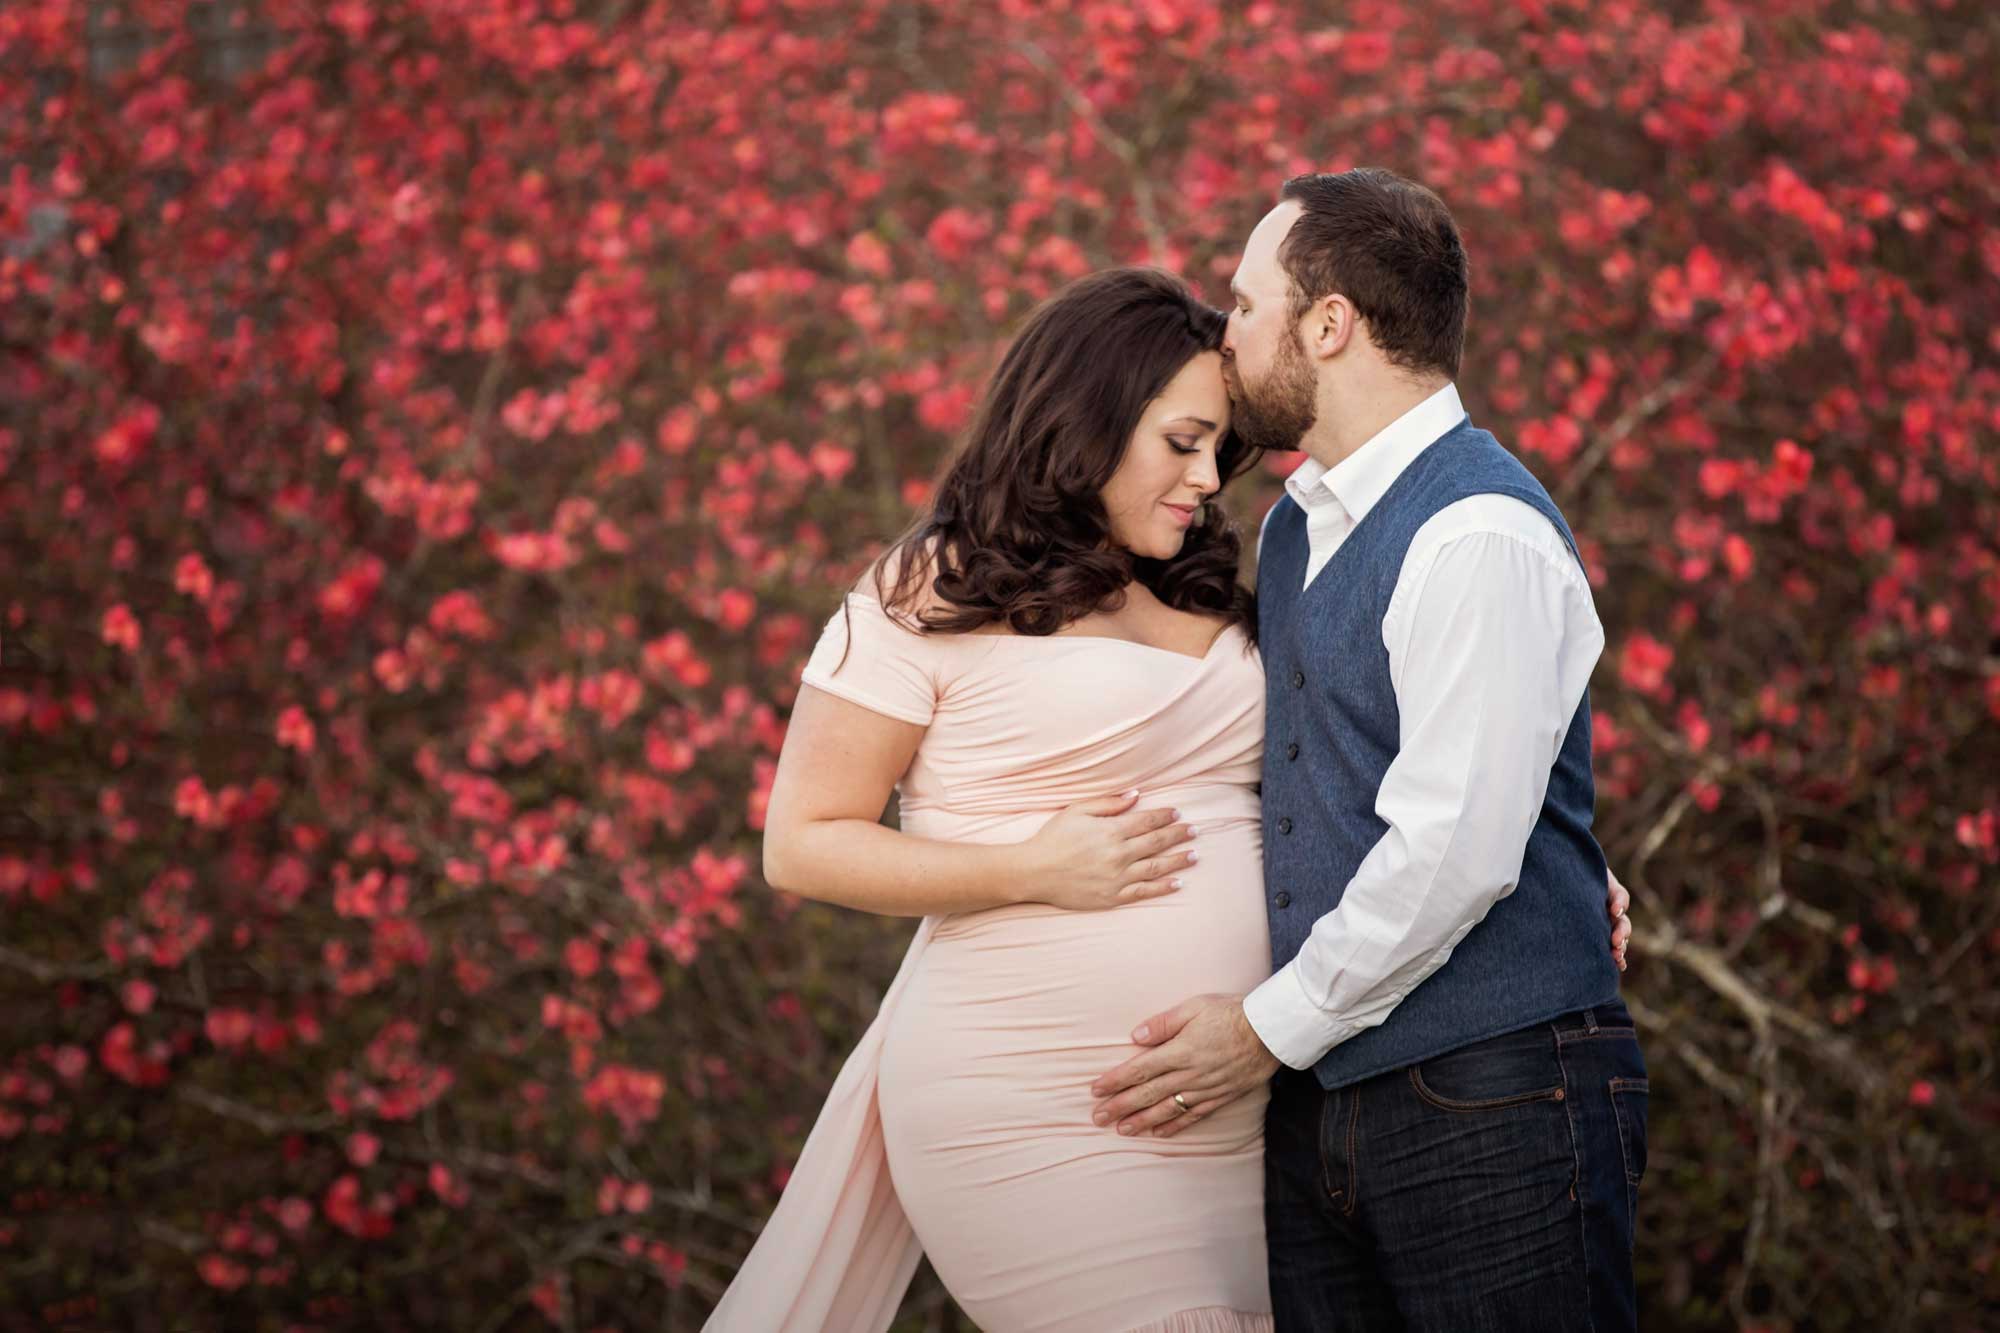 Jessica Gown  Pregnancy photos, Outdoor maternity photos, Pregnancy  photoshoot